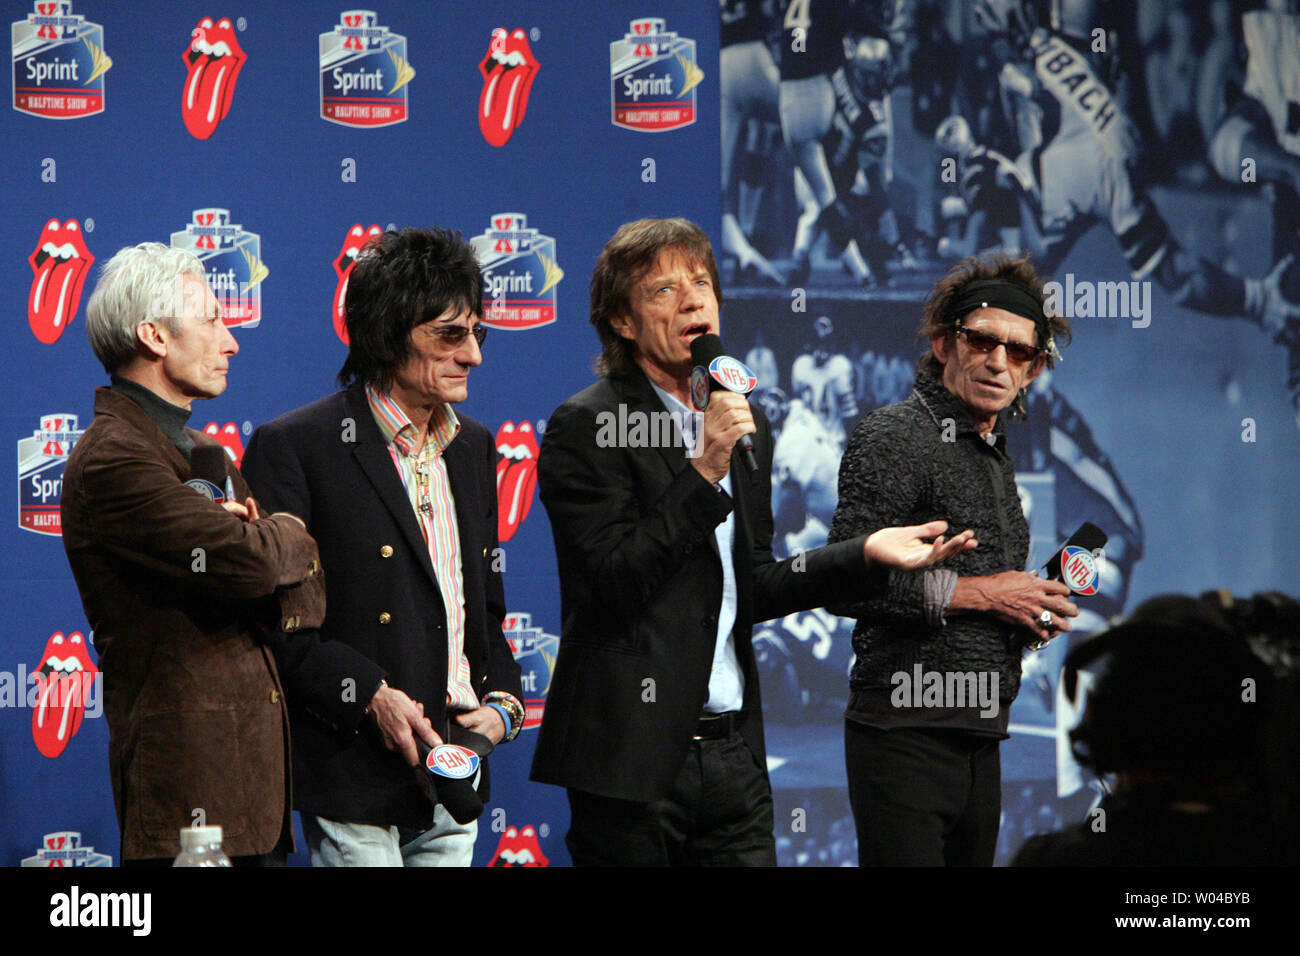 The Rolling Stones (L to R) Charlie Watts, Ron Wood, Mick Jagger and Keith Richards participate in a news conference discussing the half-time entertainment for Super Bowl XL on February 2, 2006, in Detroit, Mi. Super Bowl XL will feature the Pittsburgh Steelers and the Seattle Seahawks on February 5.   (UPI Photo/Gary Caskey) Stock Photo